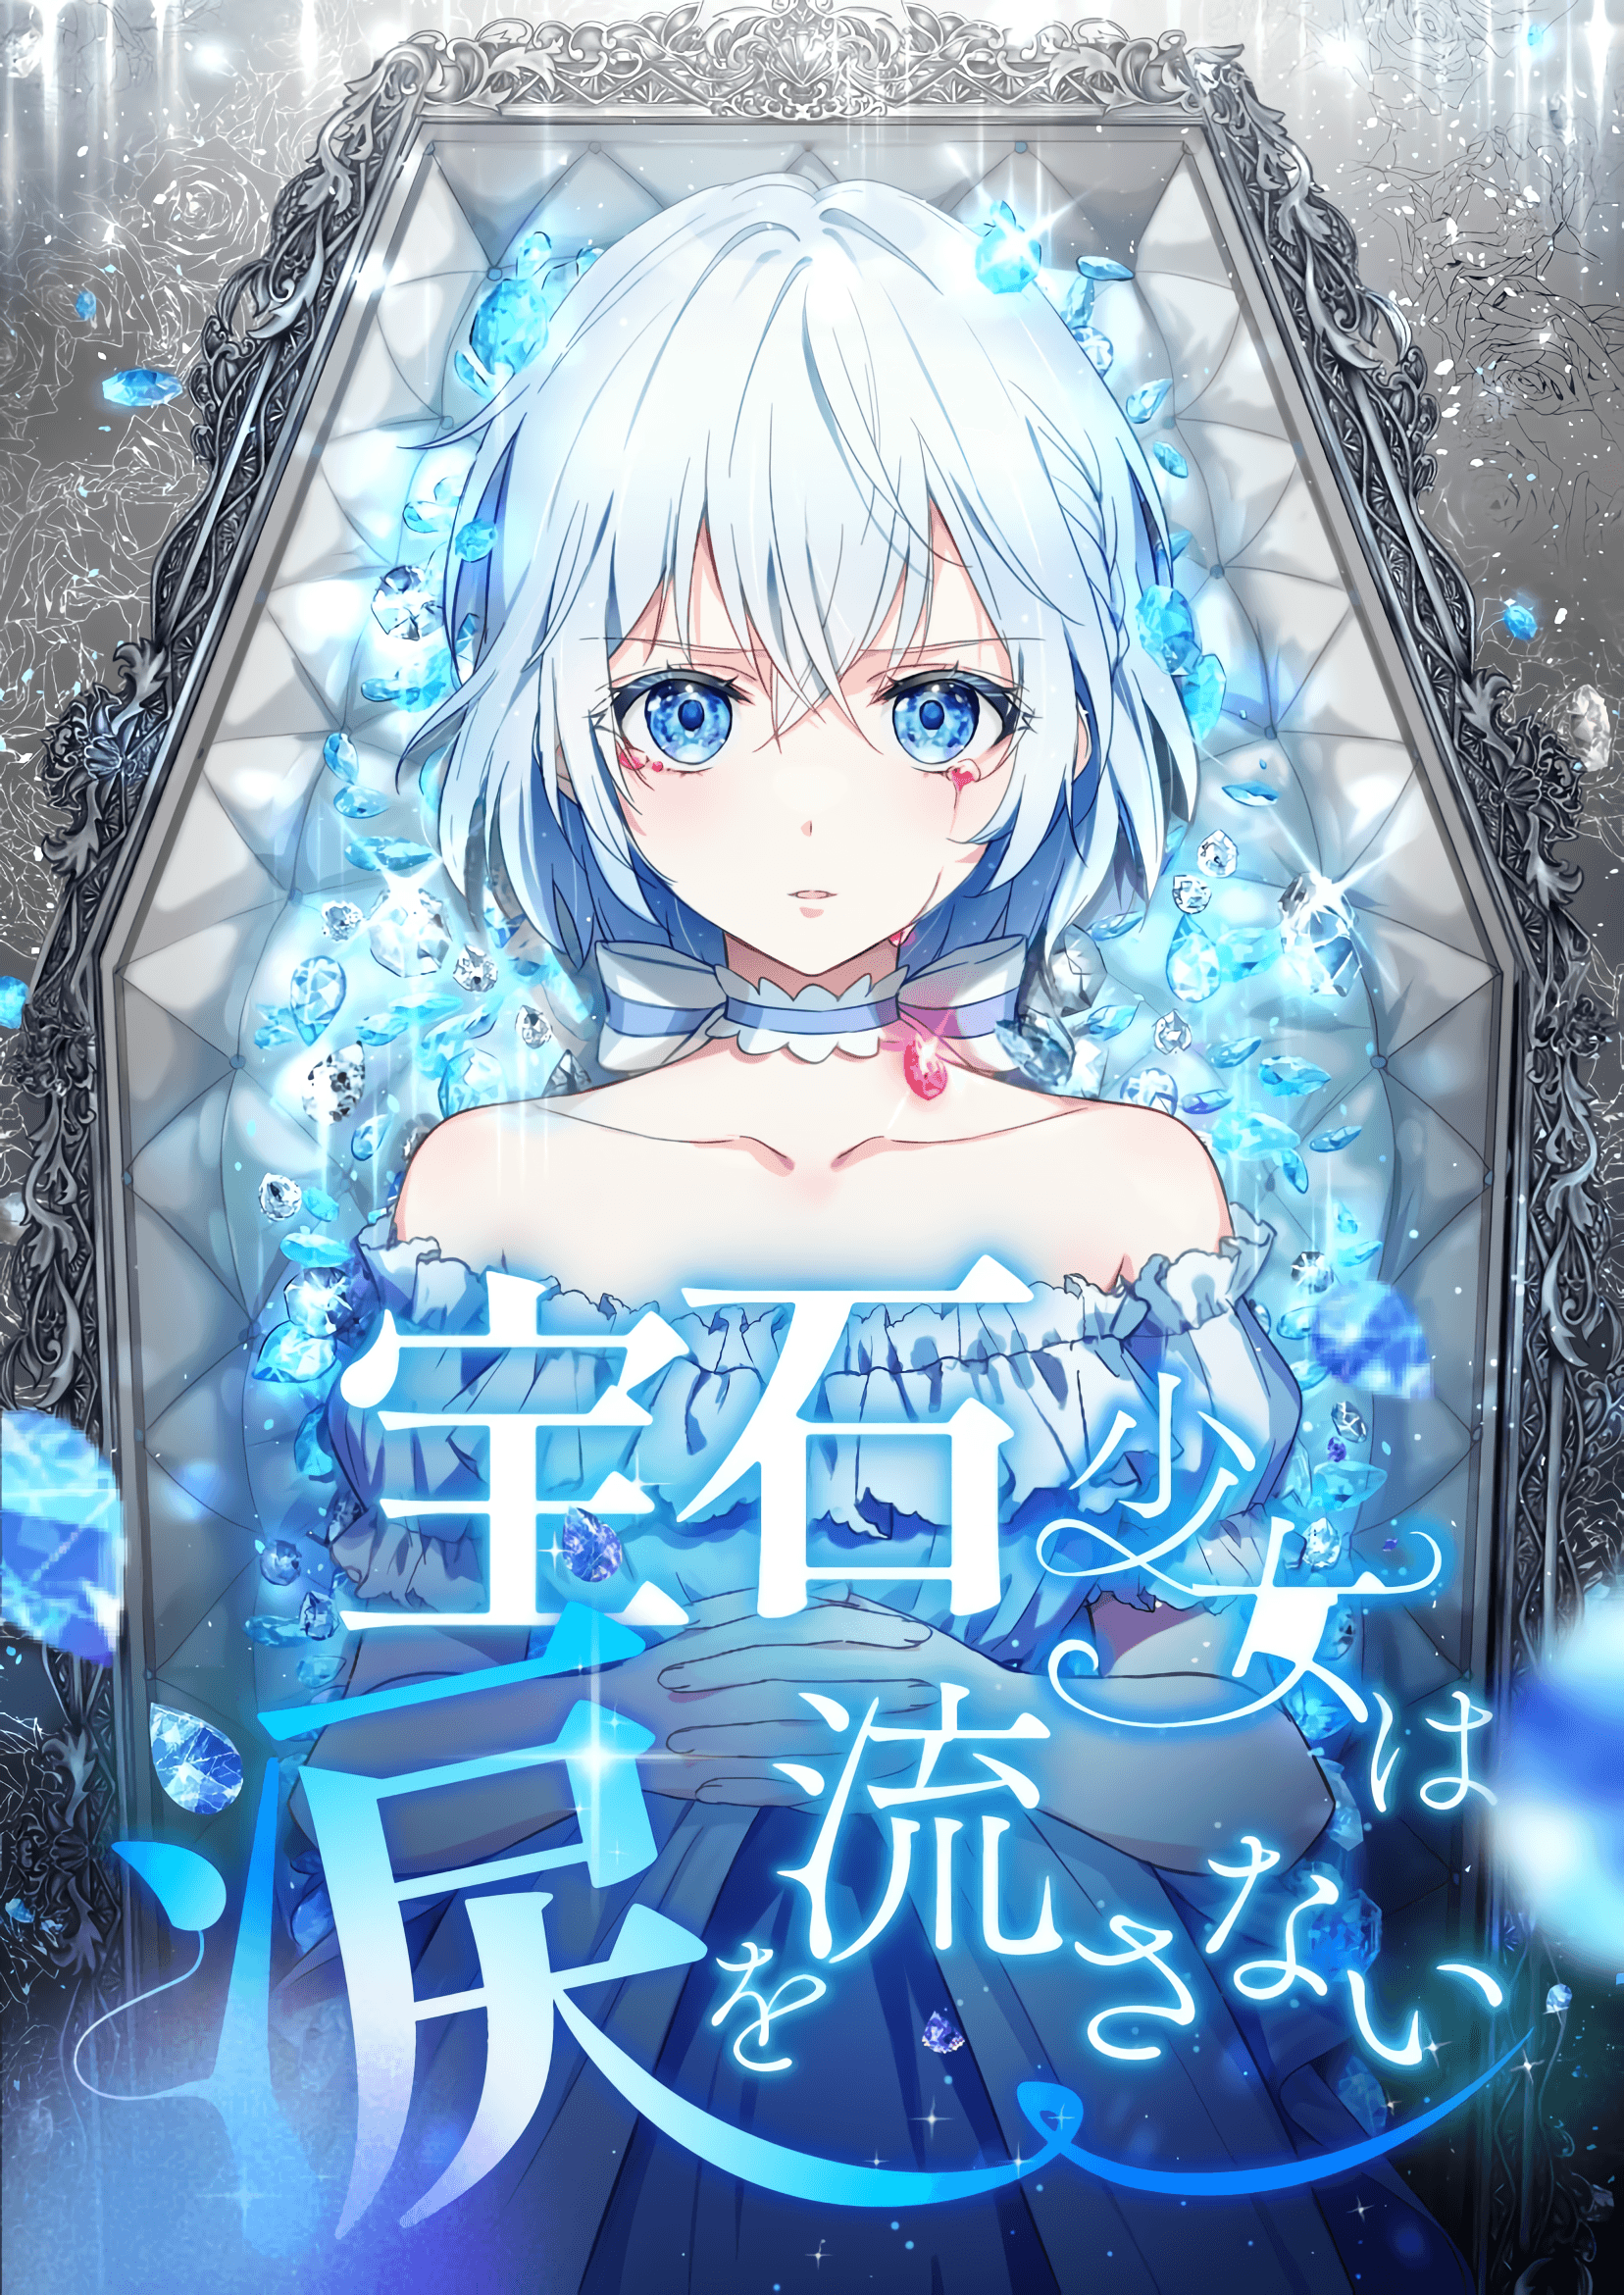 The Precious Girl Does Not Shed Tears cover image